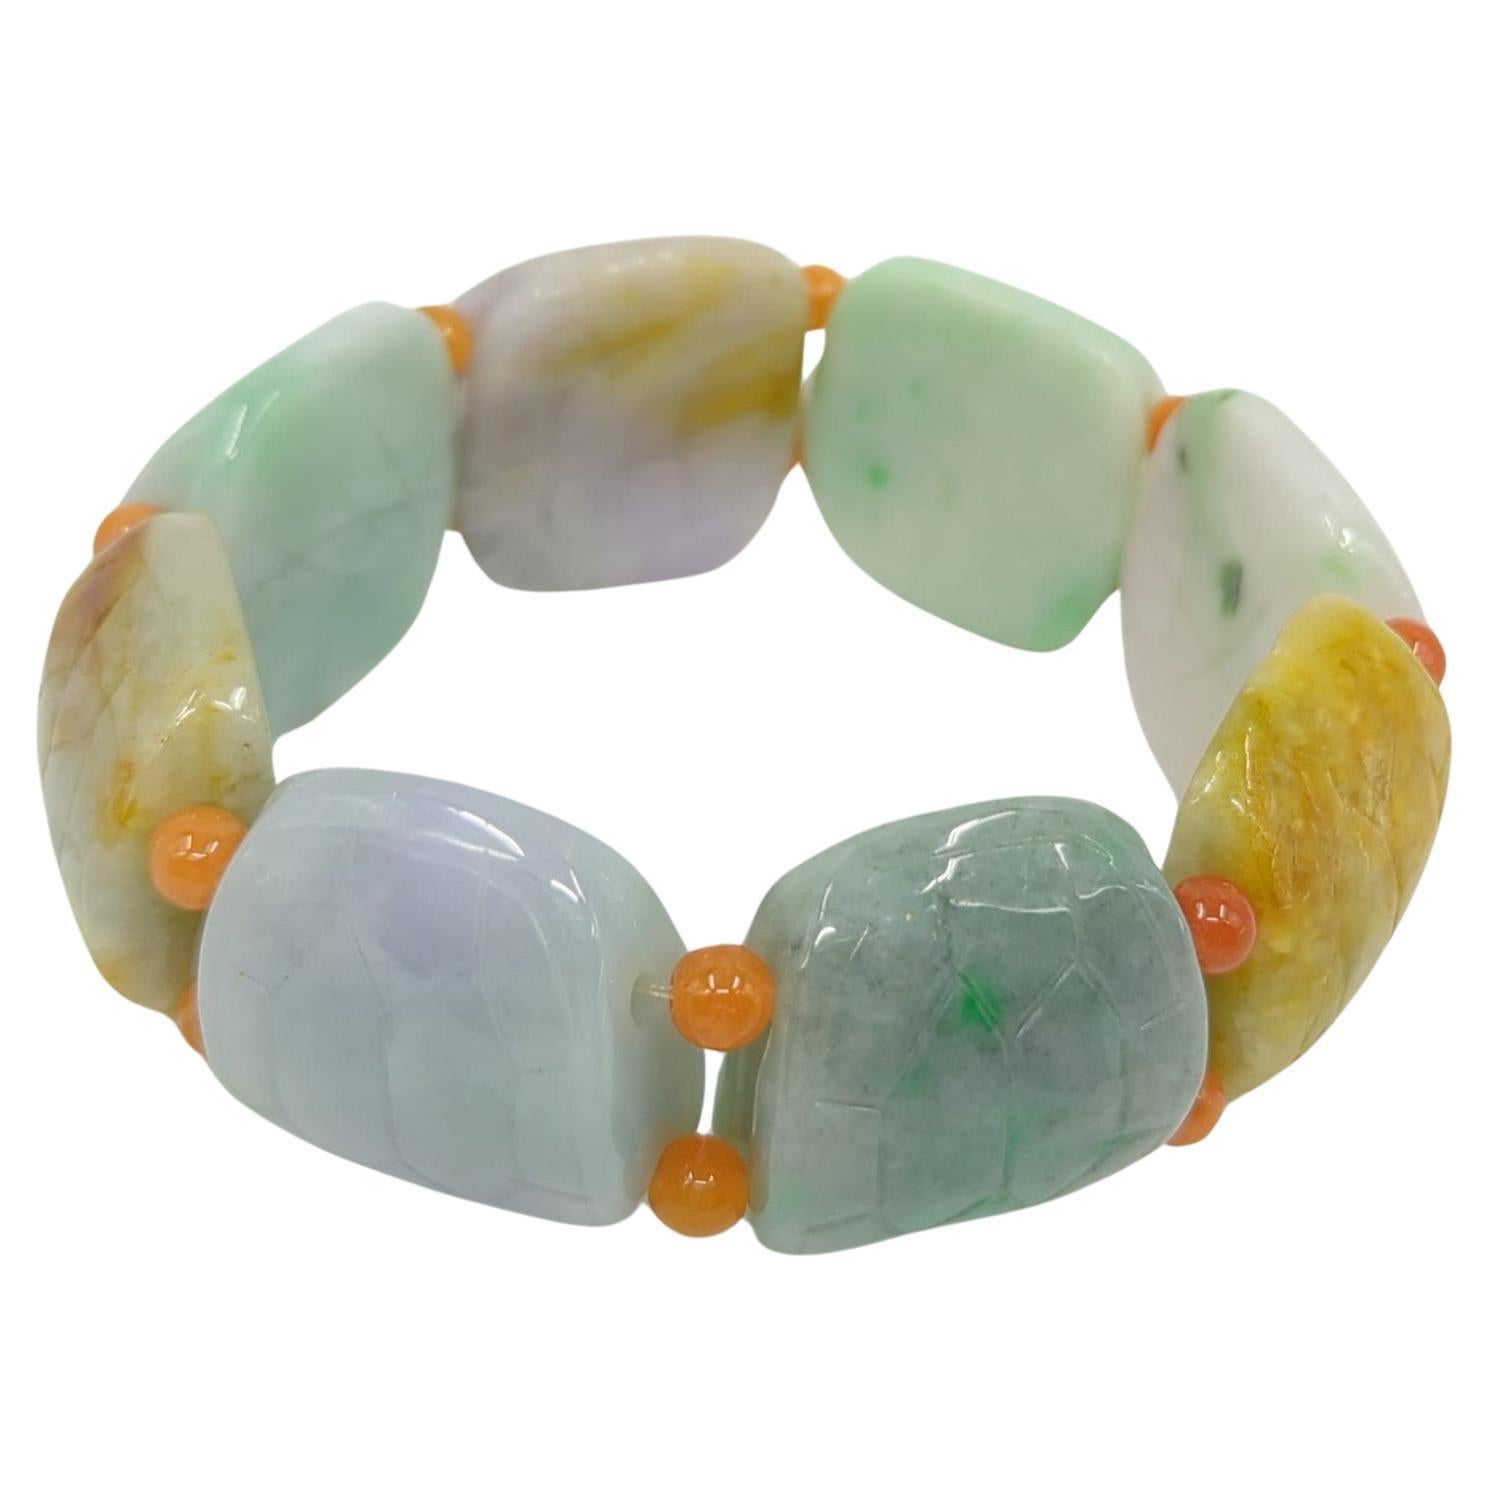 Vintage Chinese Natural Jadeite Turtle Shell Form Multi-Colored Beaded Bracelet For Sale 2